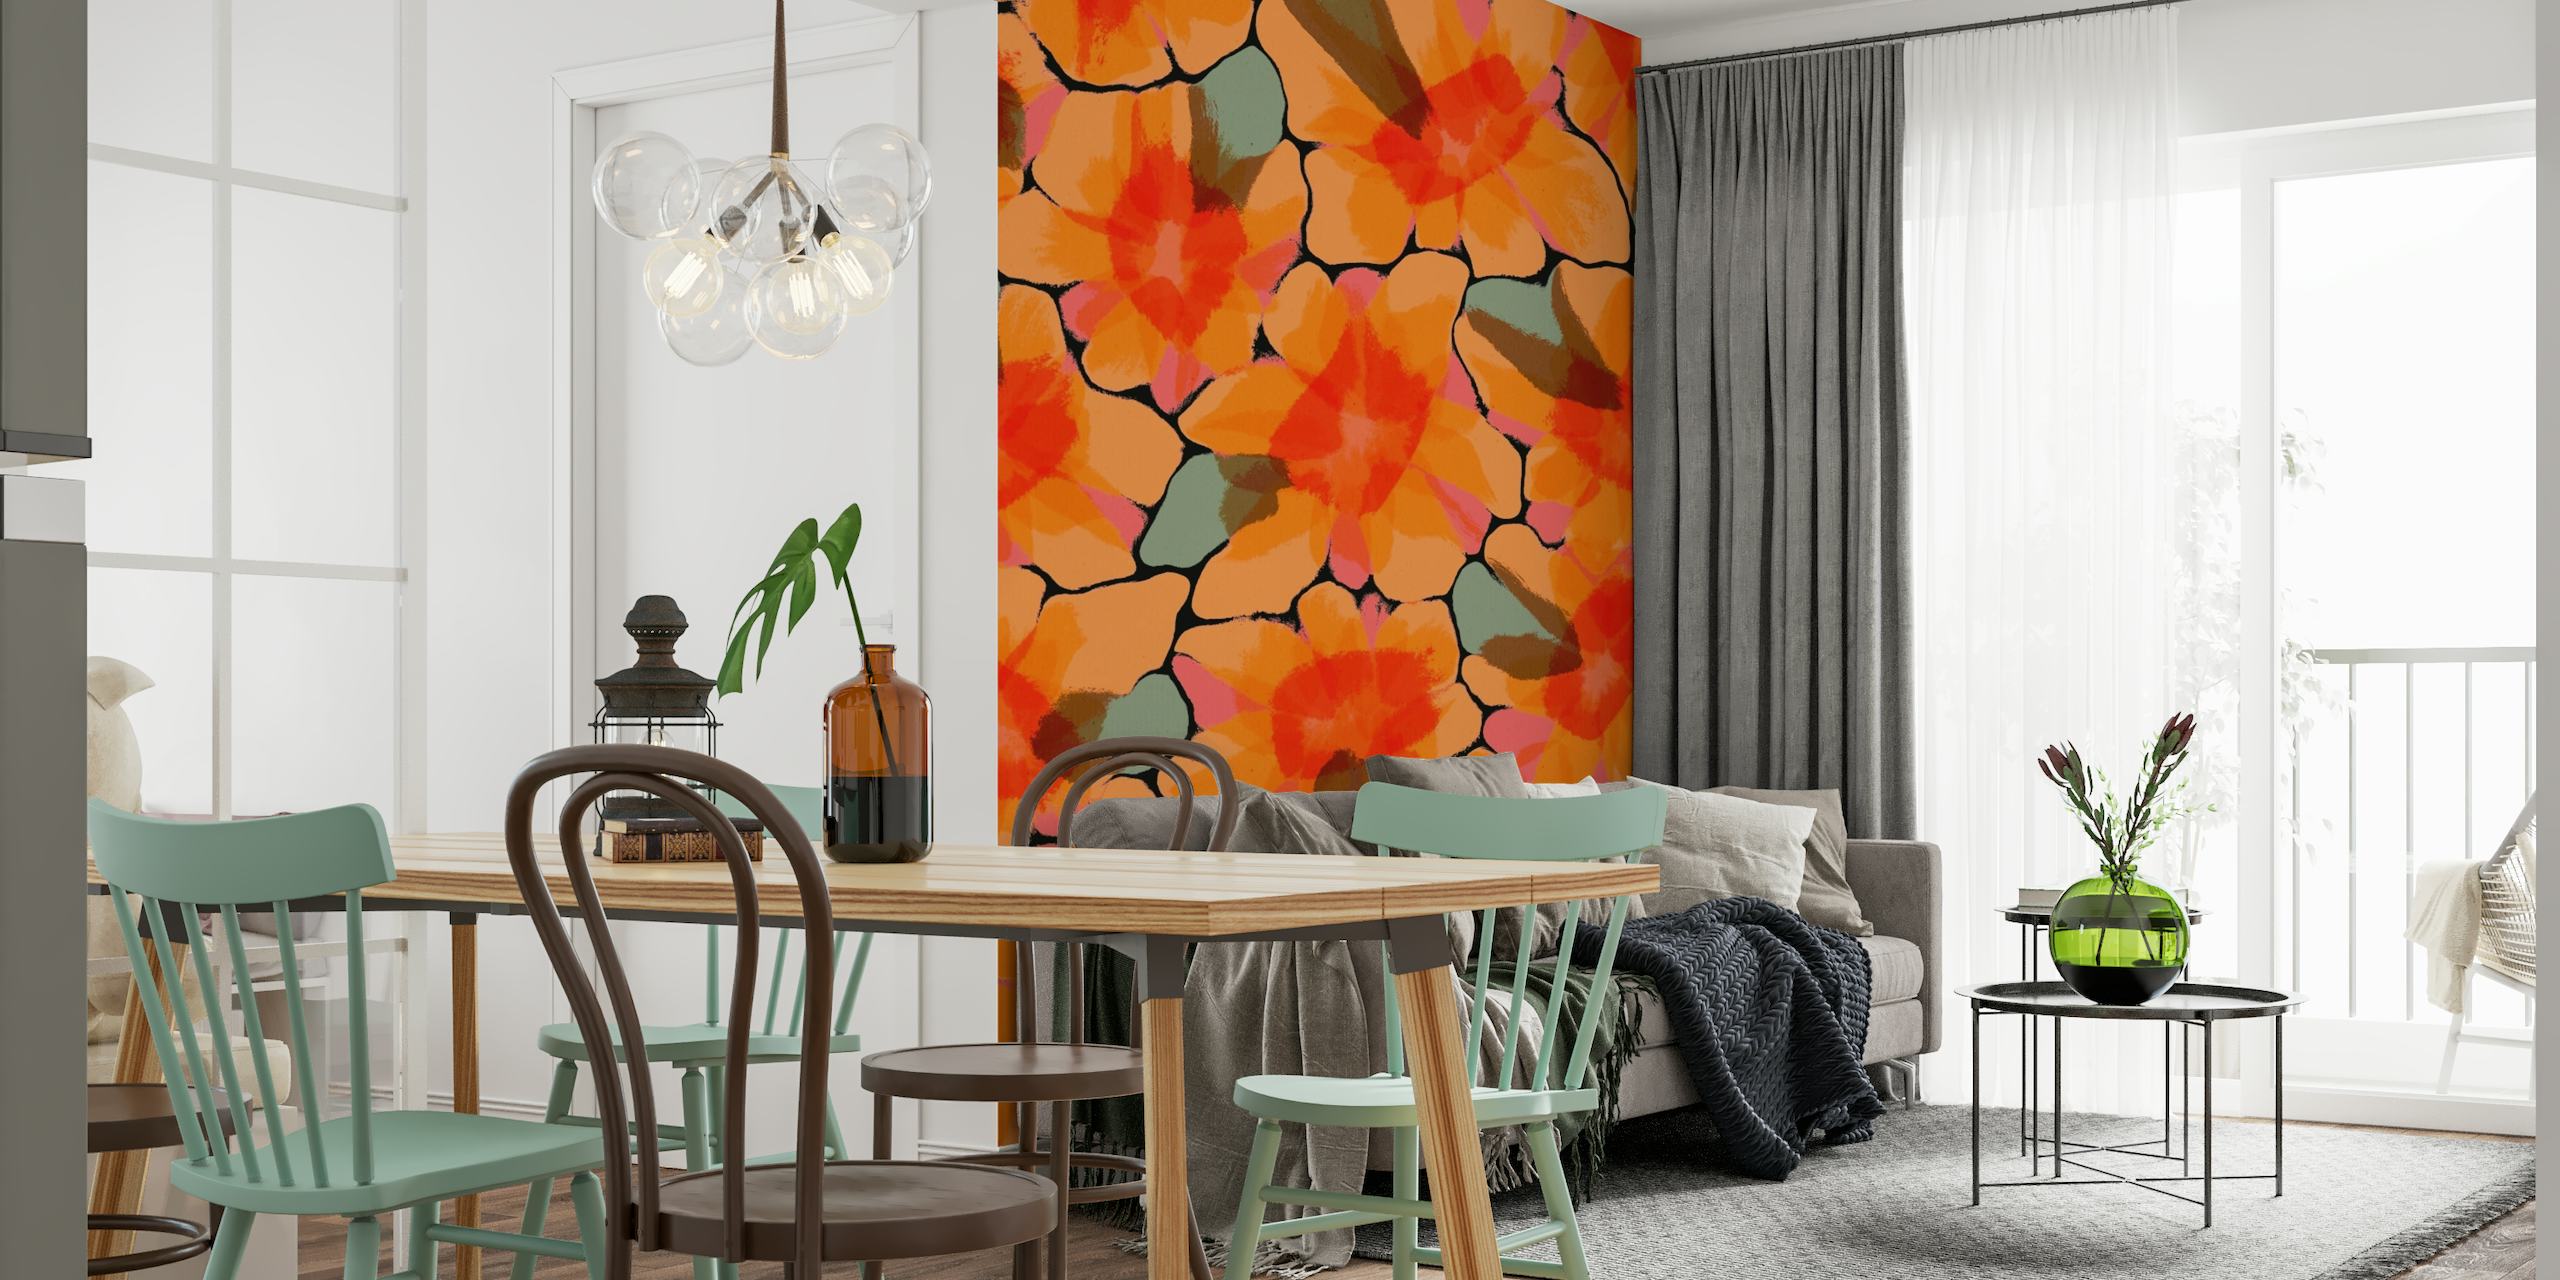 Orange floral wall mural with large blooms on a warm backdrop